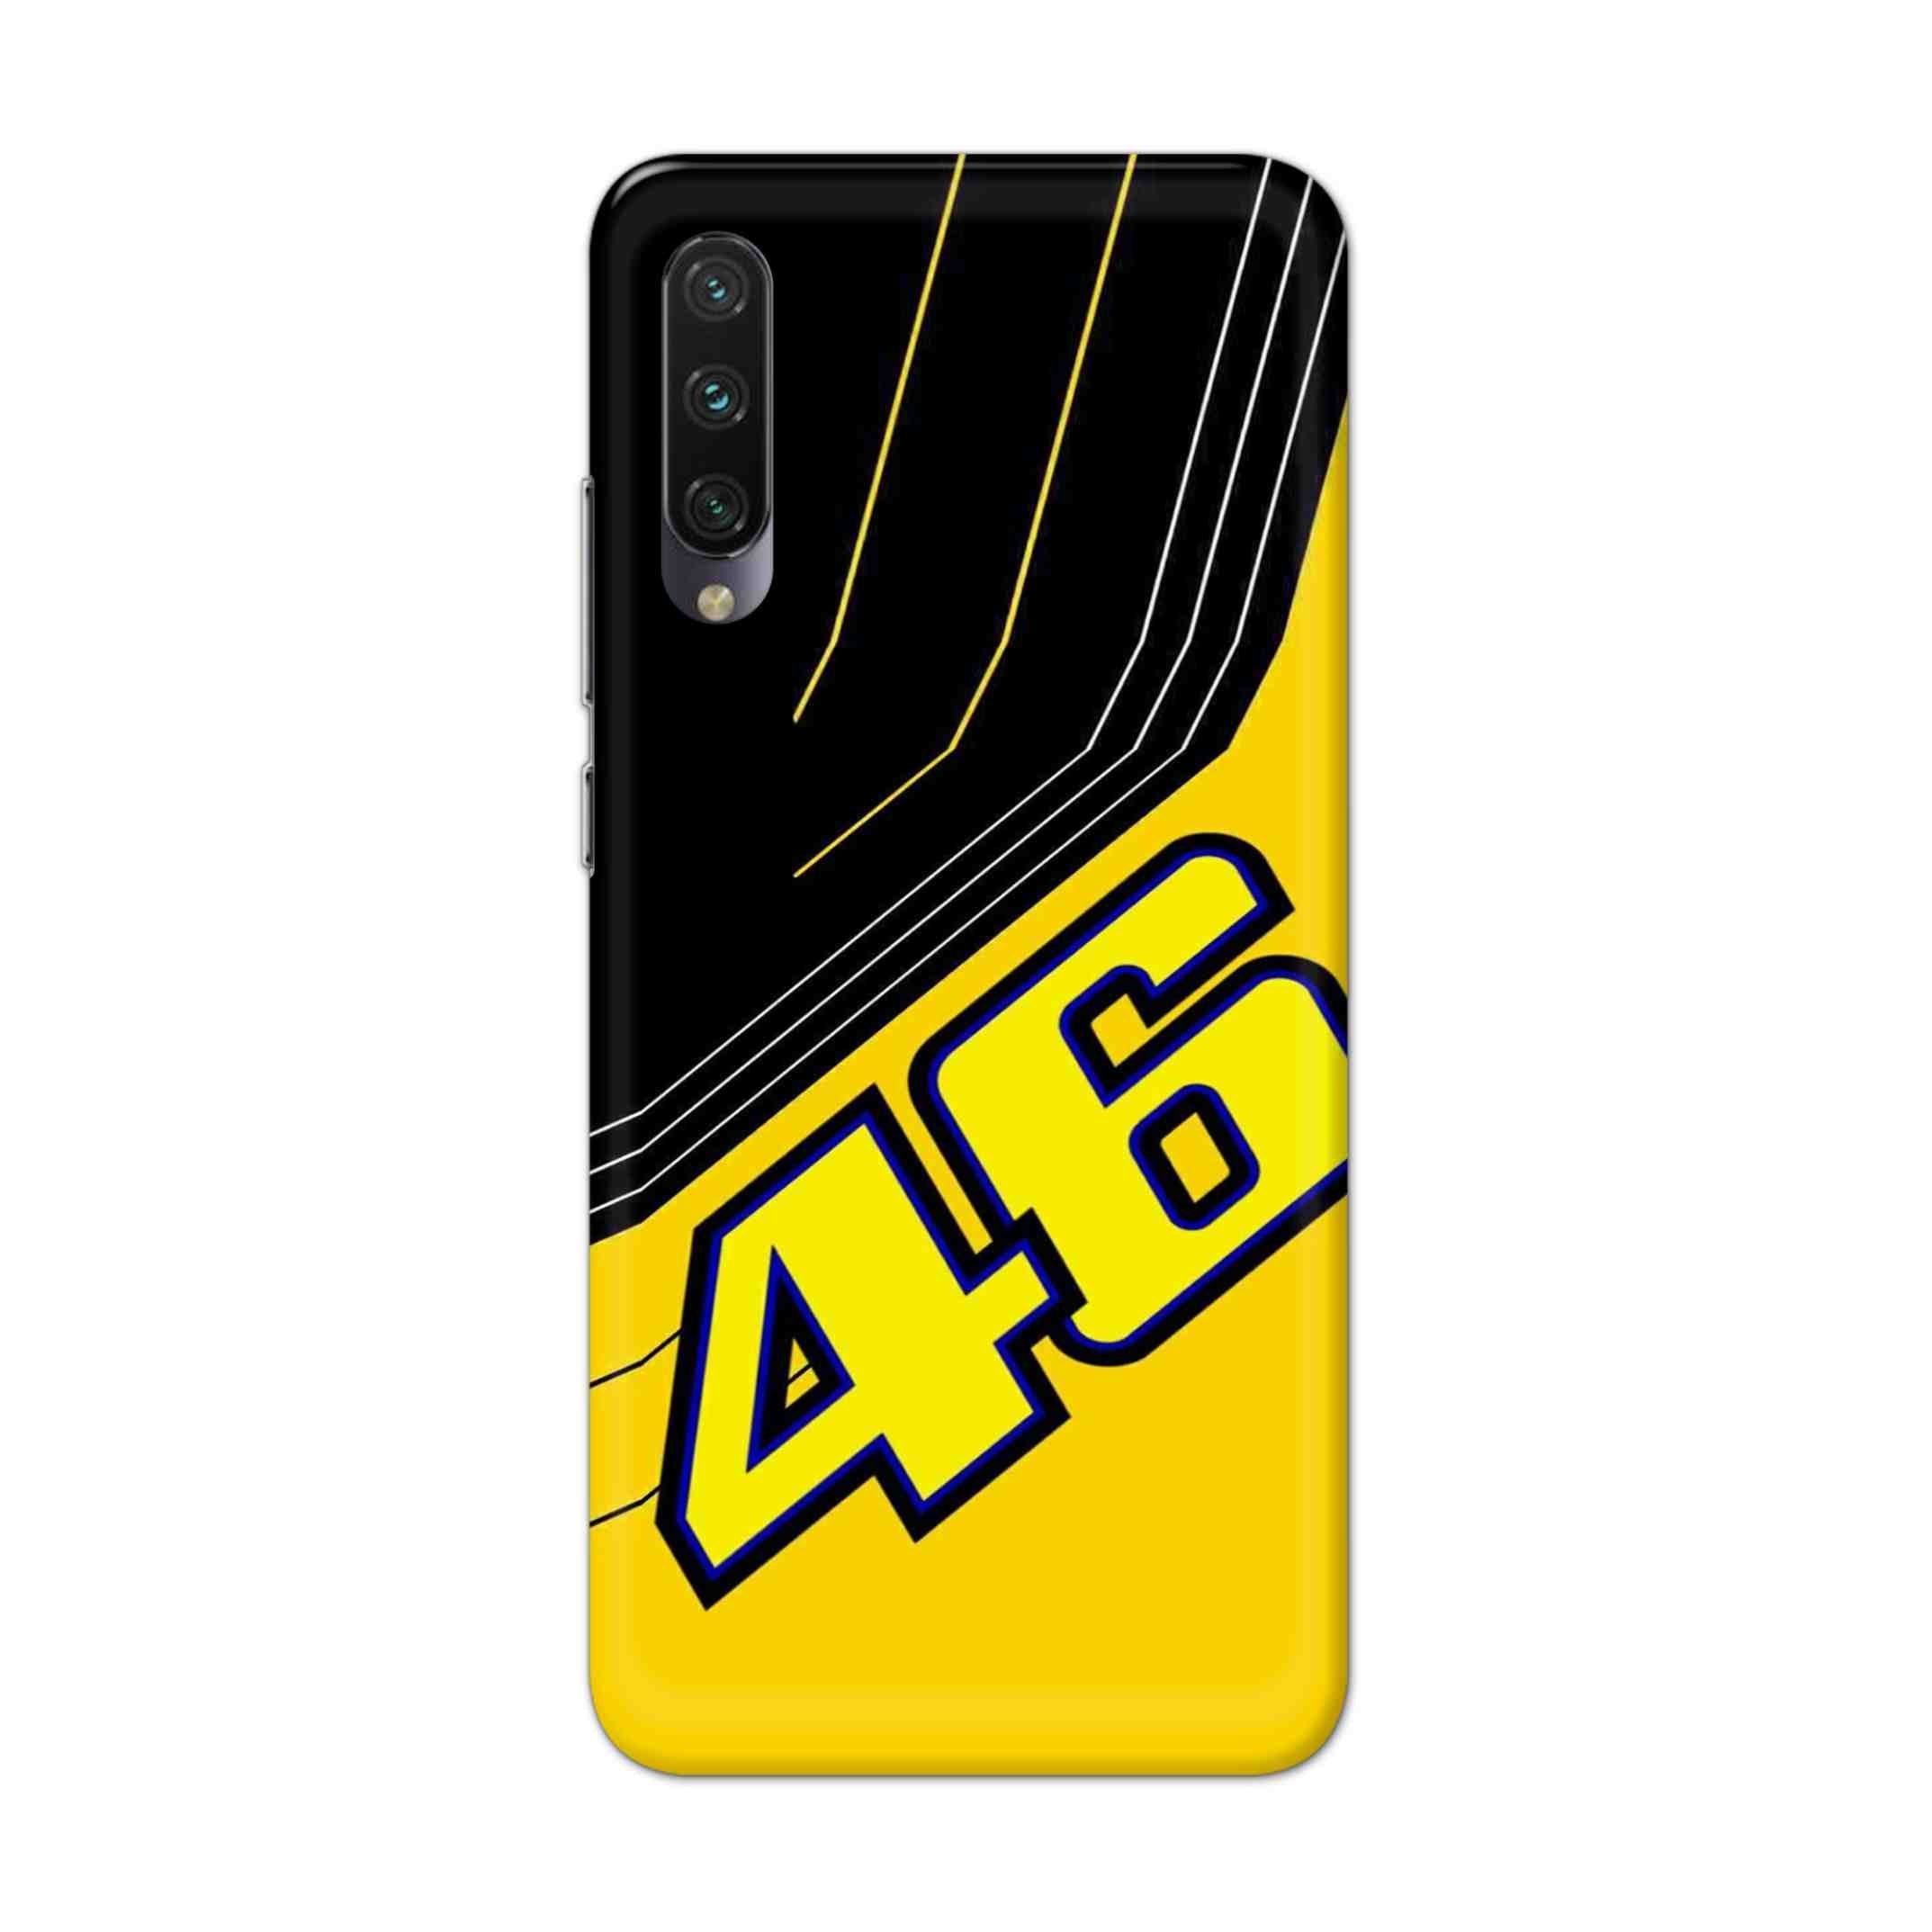 Buy 46 Hard Back Mobile Phone Case Cover For Xiaomi Mi A3 Online